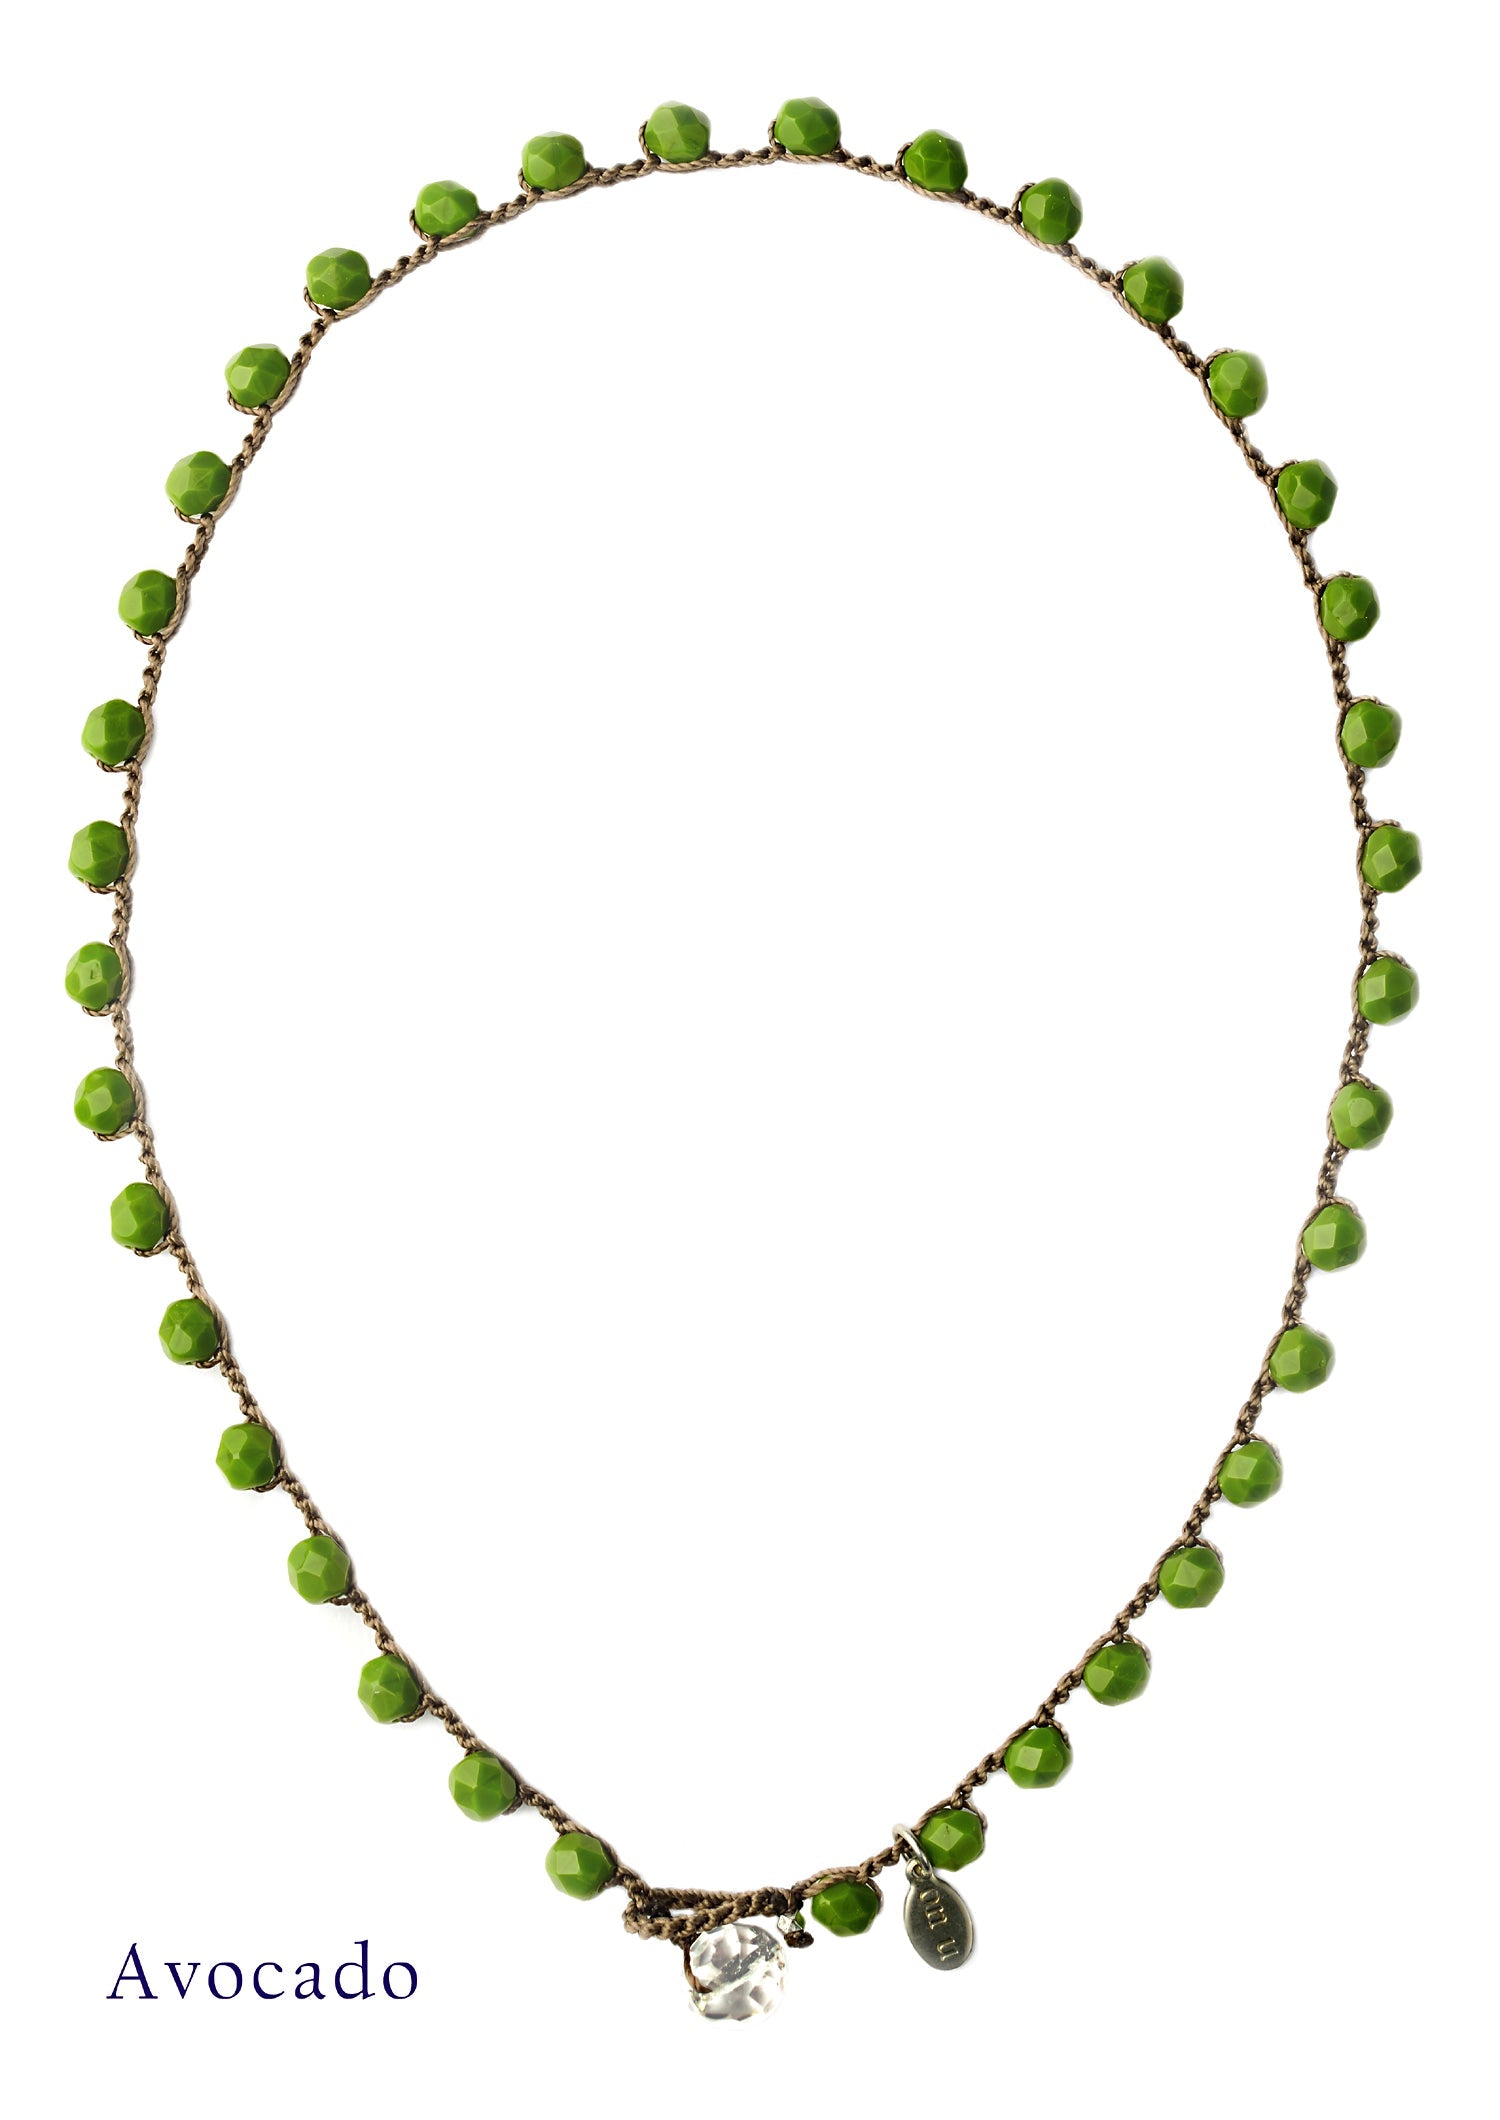 onujewelry.com - Large Bead Dot Necklace in Avocado.  Designed, and created, by Donna Silvestri, On U Jewelry, Richmond, VA